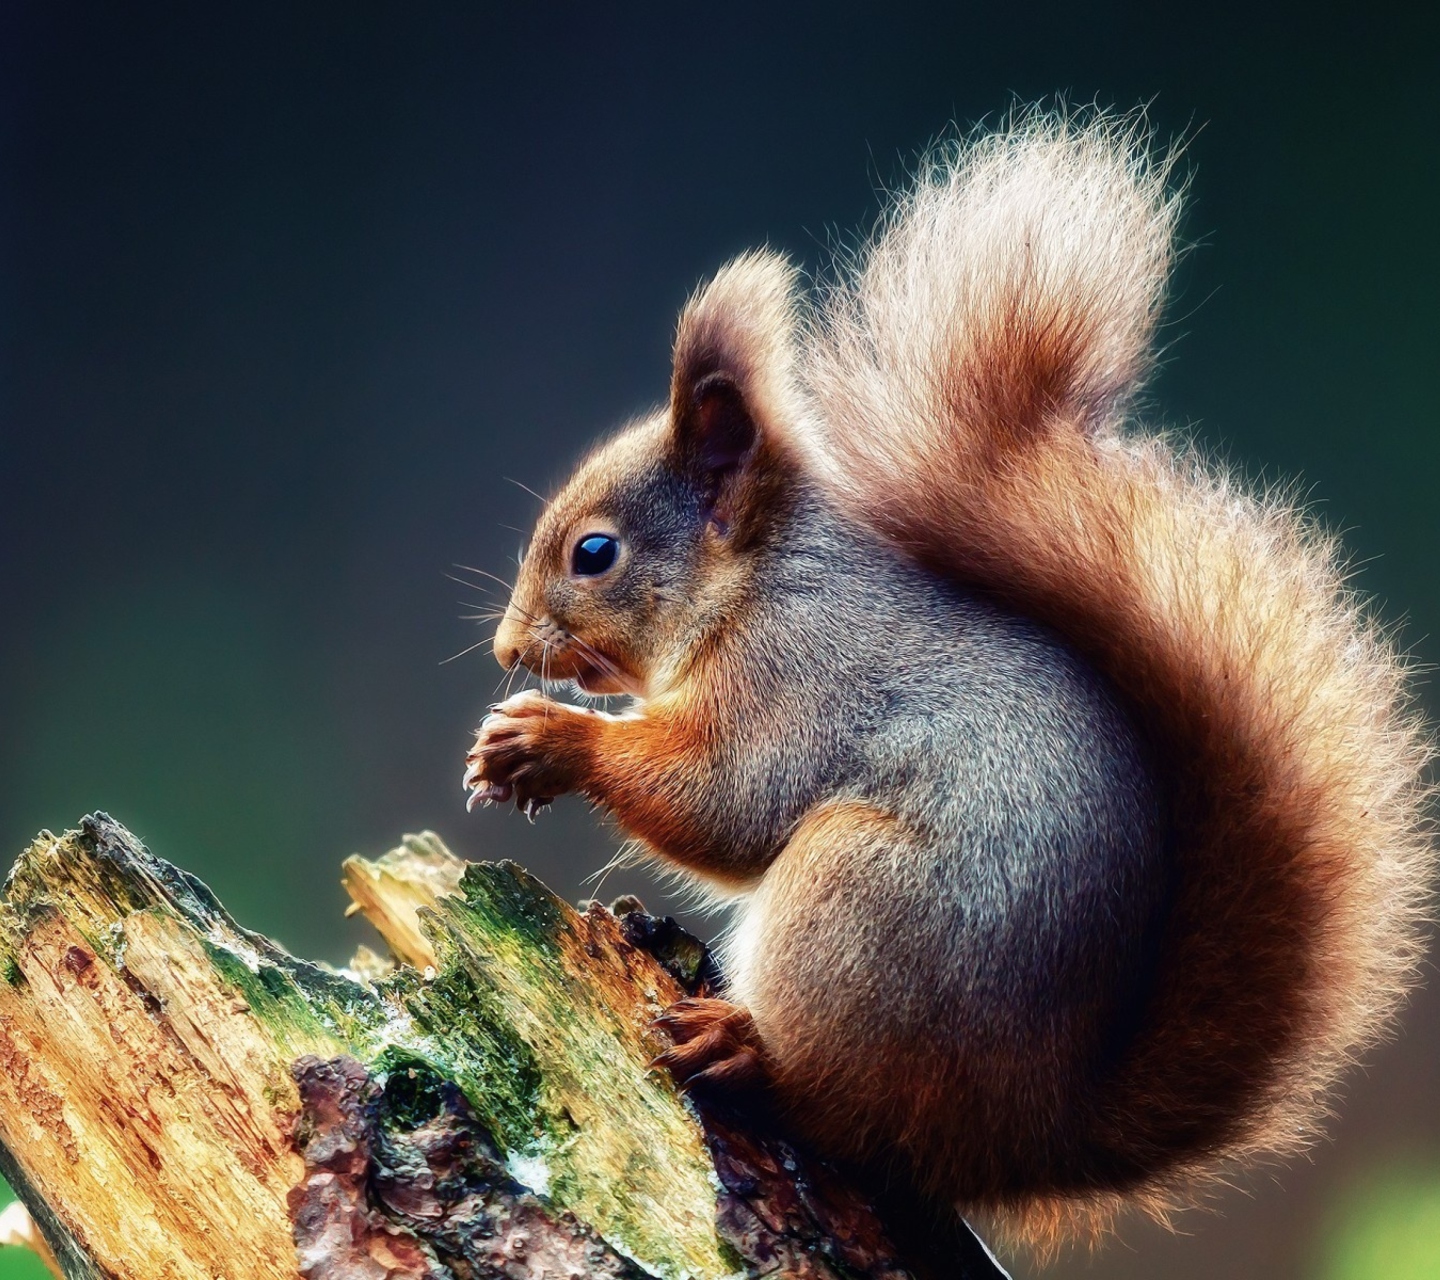 Squirrel Eating A Nut wallpaper 1440x1280